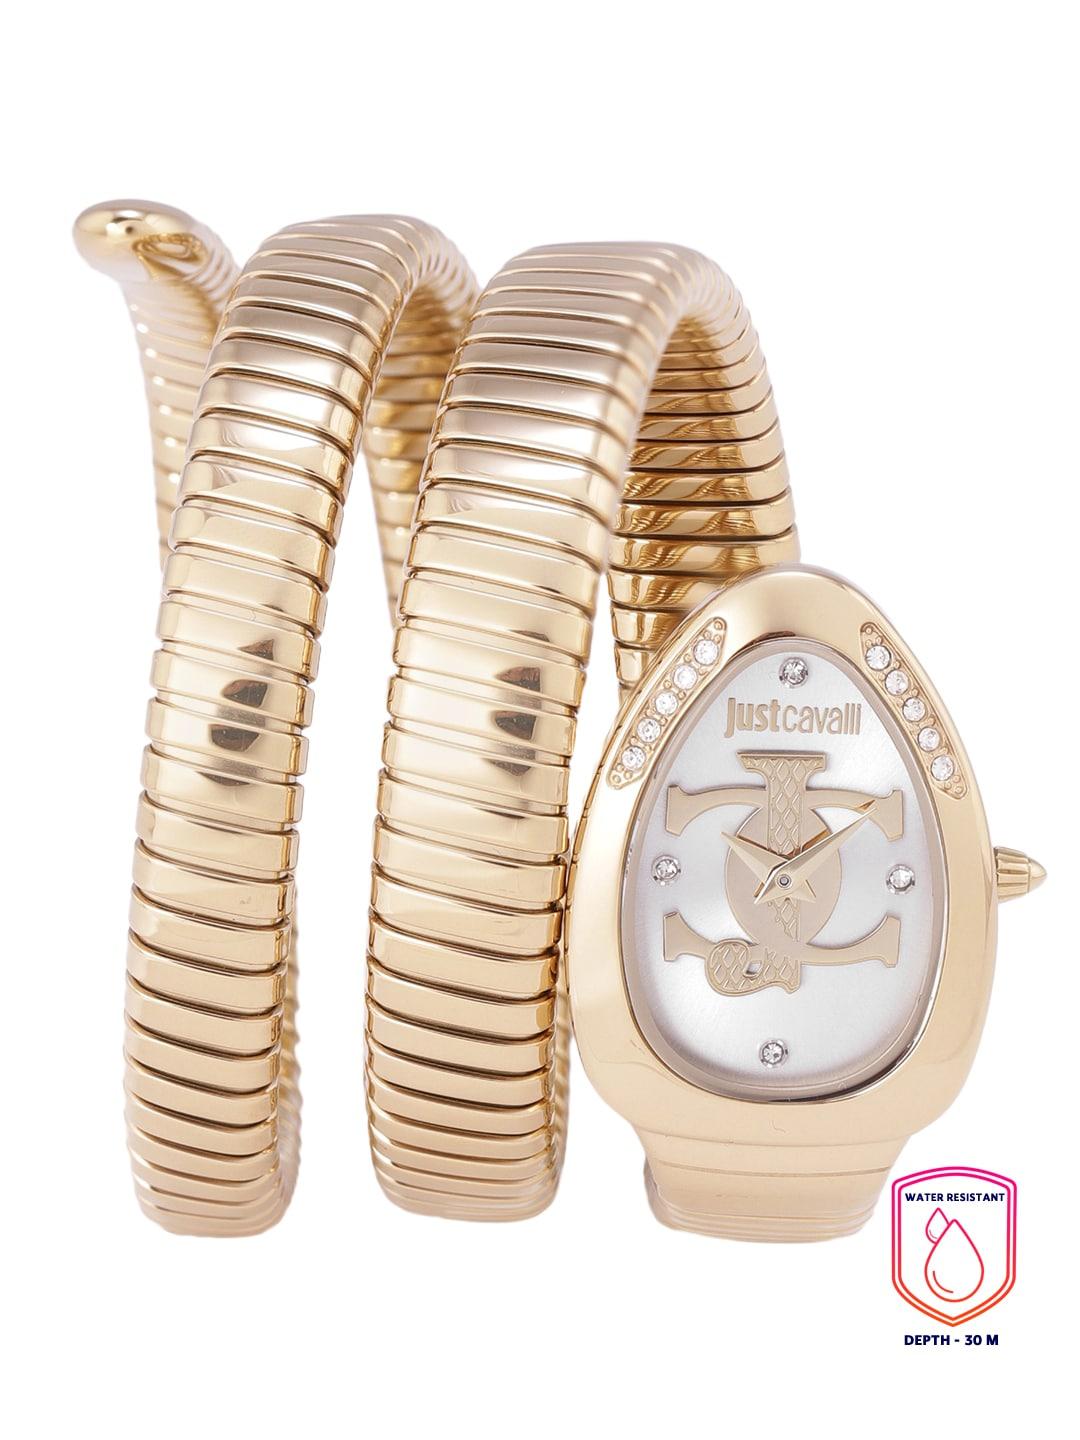 Just Cavalli Women Silver-Toned Dial & Gold-Toned Straps Analogue Watch JC1L228M0035